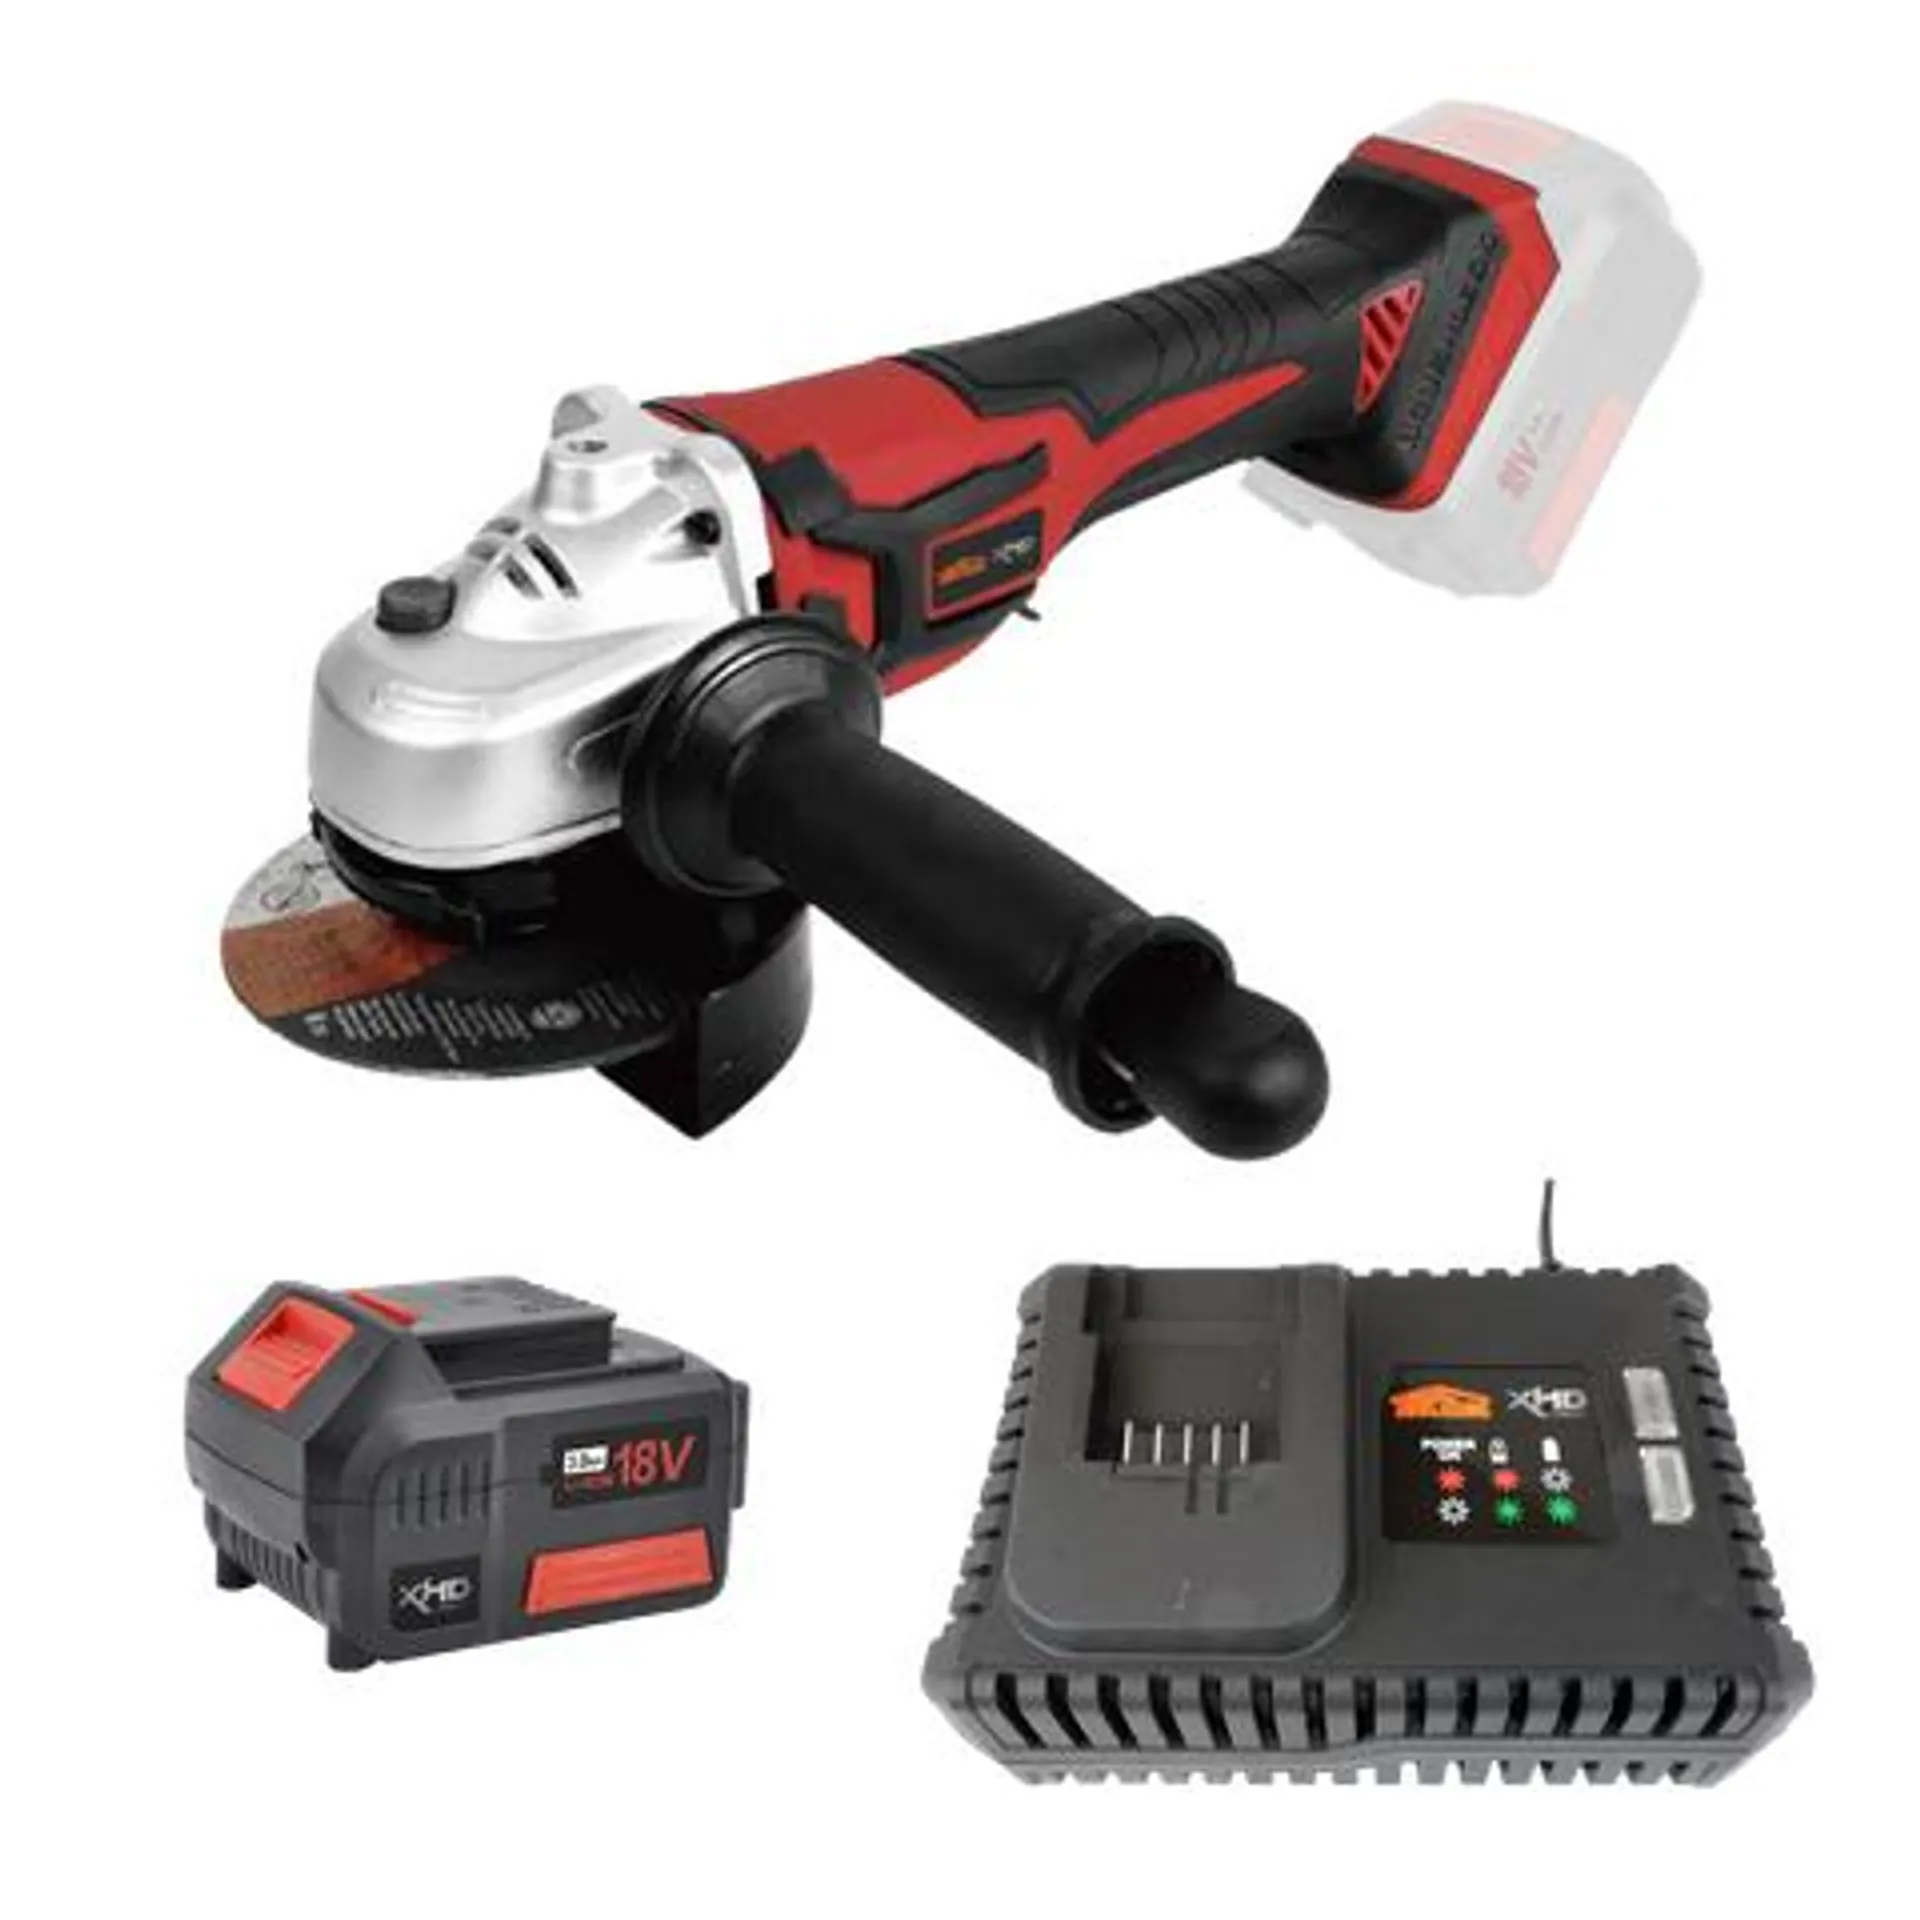 ToolShed XHD Cordless Angle Grinder Brushless 115mm 18V 3Ah